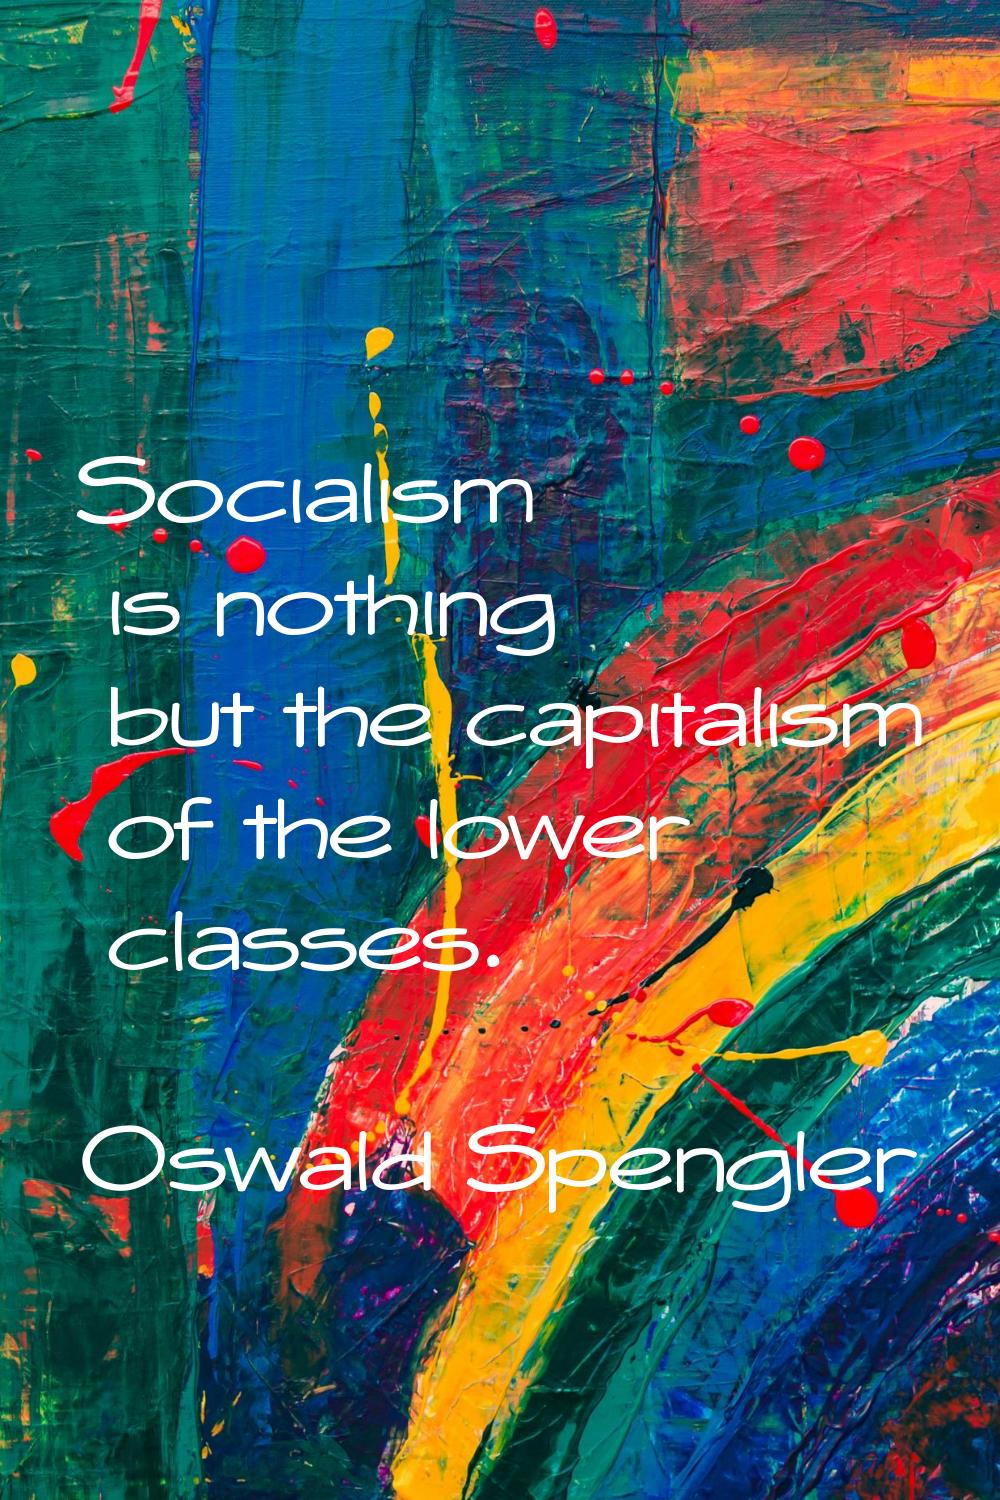 Socialism is nothing but the capitalism of the lower classes.